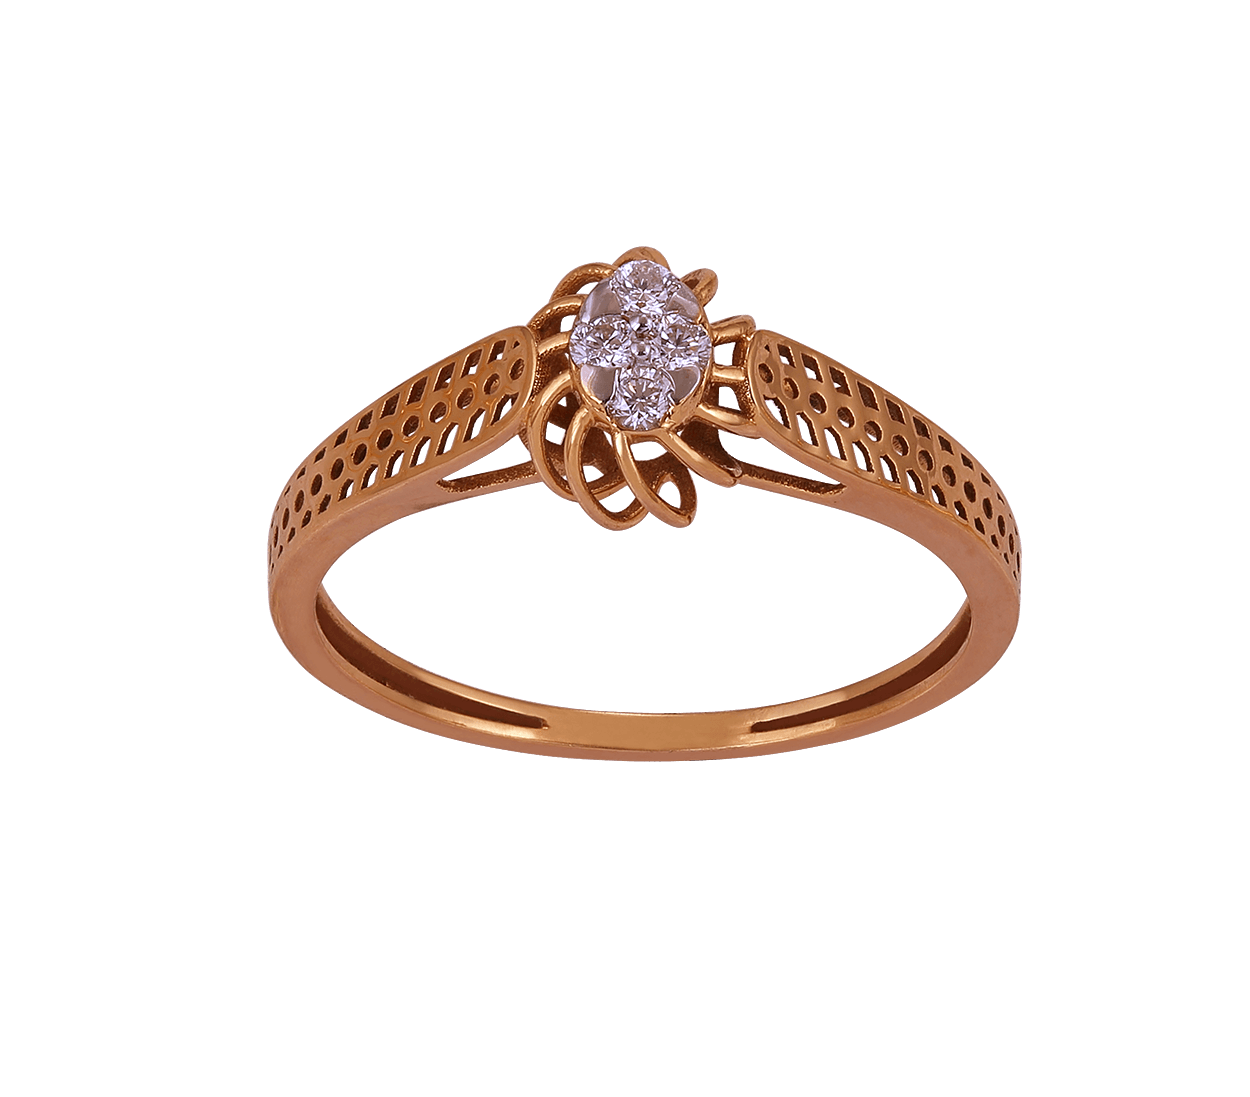 Best Place to Buy Lab rown Diamond Rings: Online or In-Store?